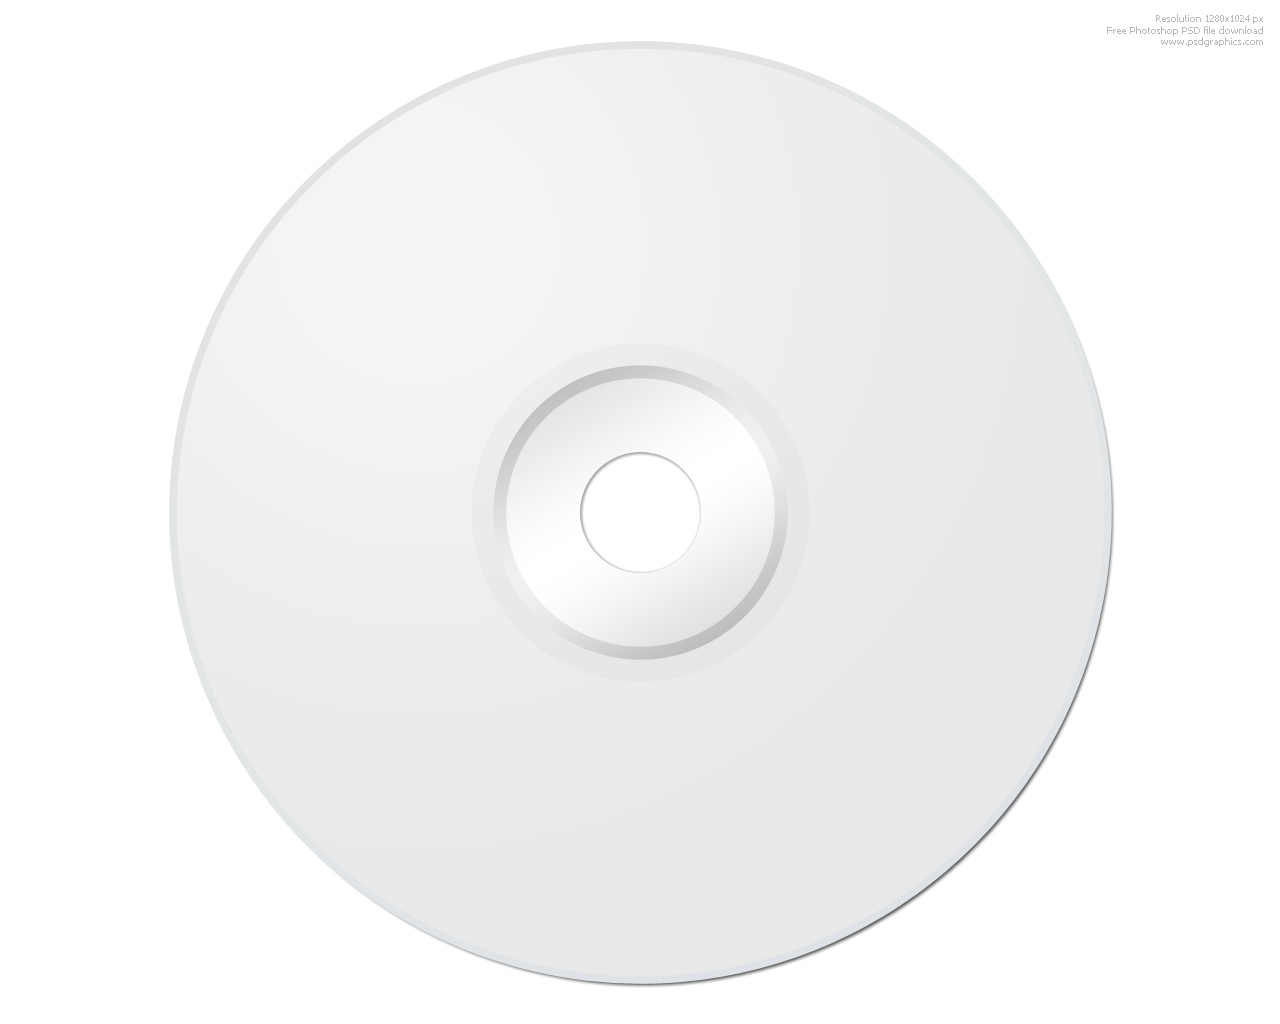 20 CD Label Template PSD Images - Free DVD Label Templates, Avery Inside Memorex Cd Labels Template